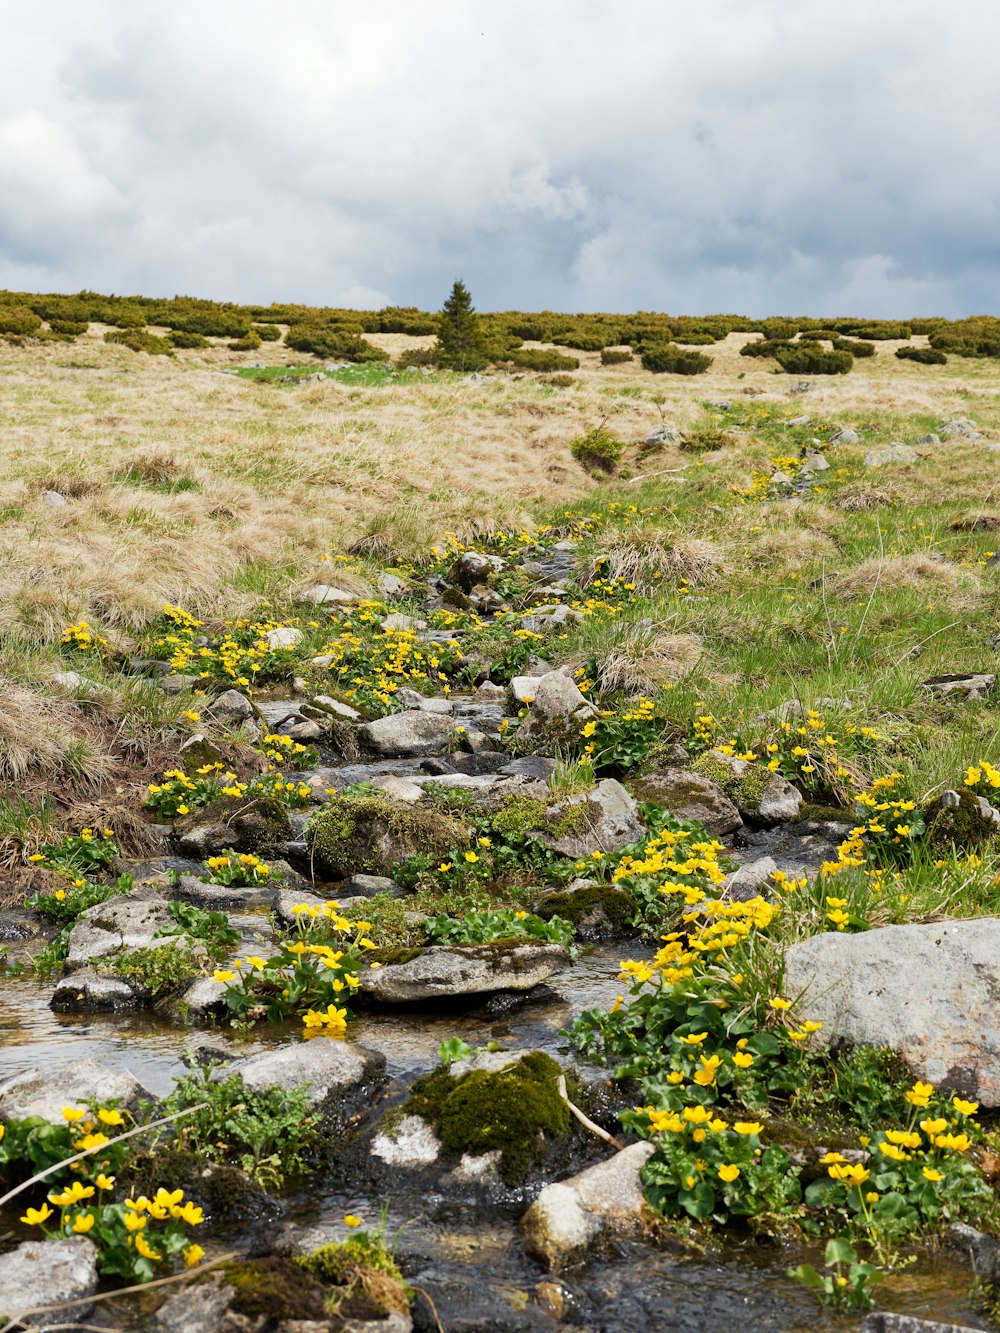 a grassy field with yellow flowers and rocks